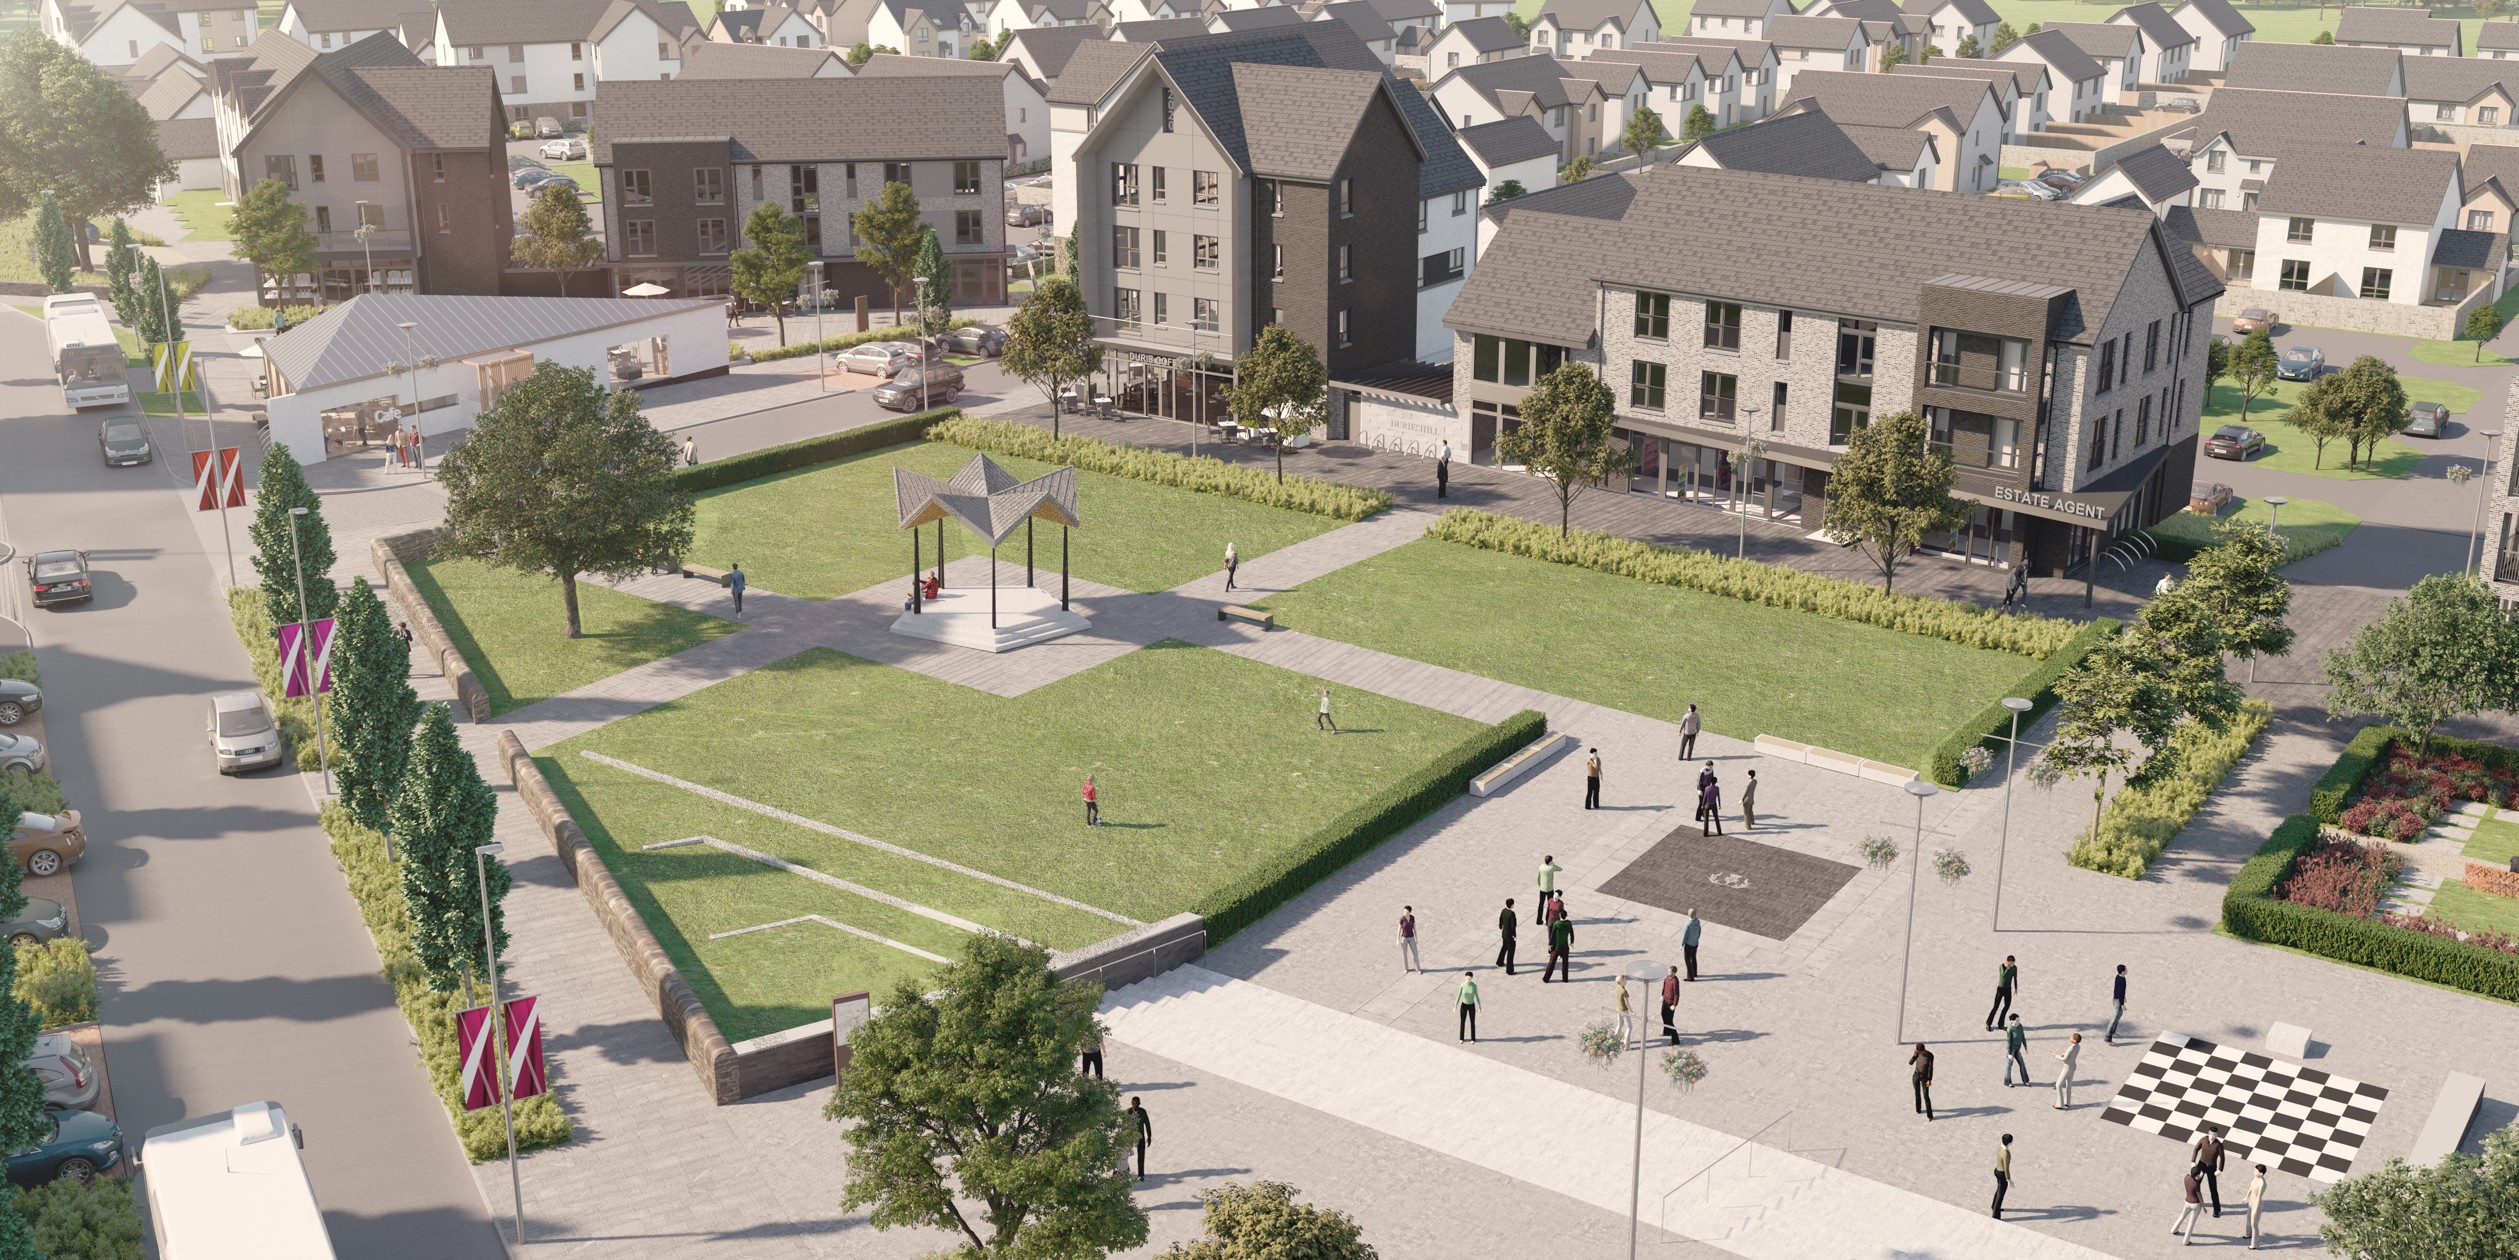 Springfield receives planning consent for 3,000-home Durieshill ‘village’